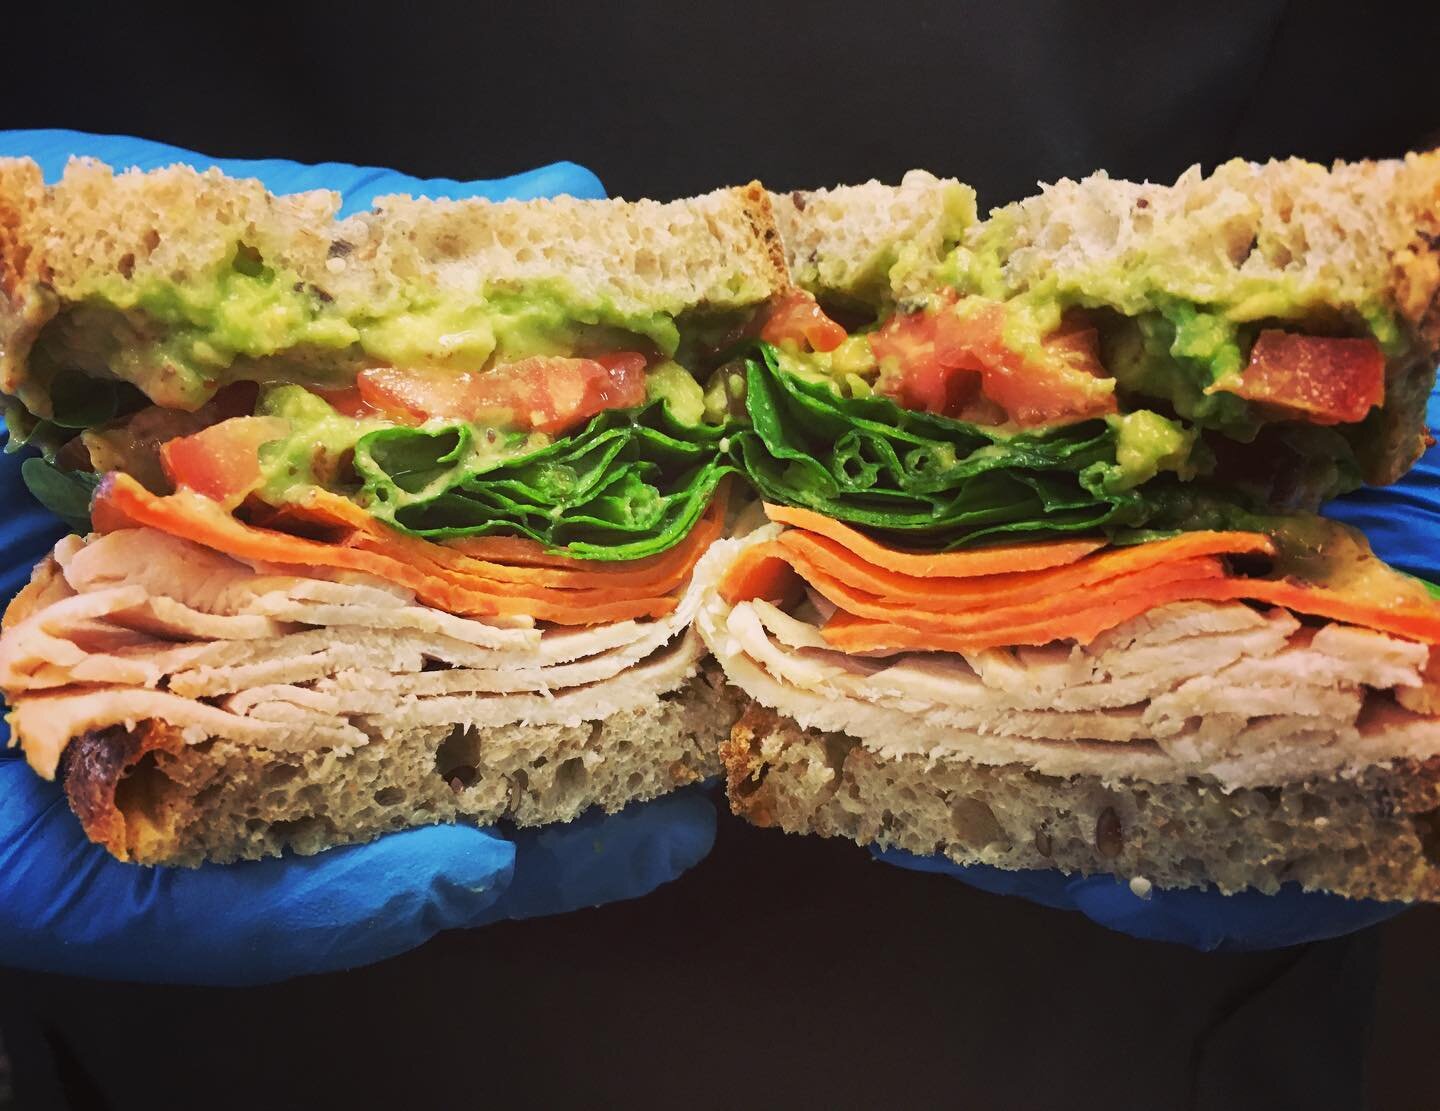 Superhero your way through this week with our Turkey Superfood Sandwich!  #sandwich #turkeysandwich #lunch #lunchtime #deli #sandiego #sandiegorestaurants #smallbusiness #supportsmallbusiness #local #localbusiness